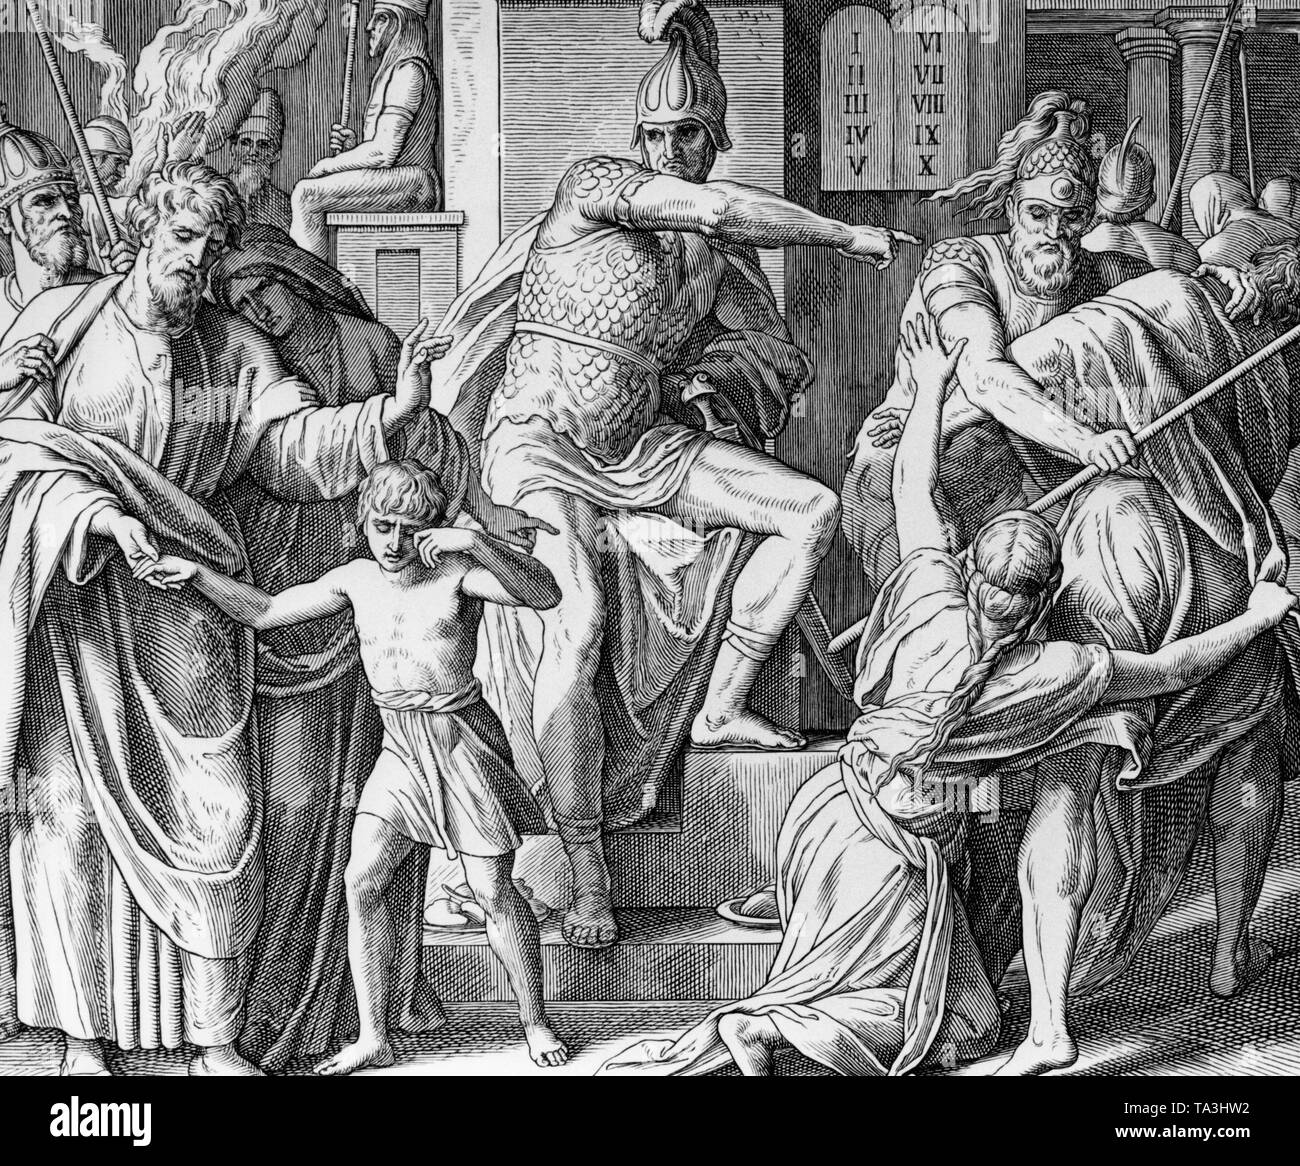 Wood engraving 'Antiochus persecutes the Israelites', depiction from the First Book of the Maccabees by Julius Schnorr von Carolsfeld (1794-1872) from the series 'Bible in Pictures' from the 1850s. Stock Photo